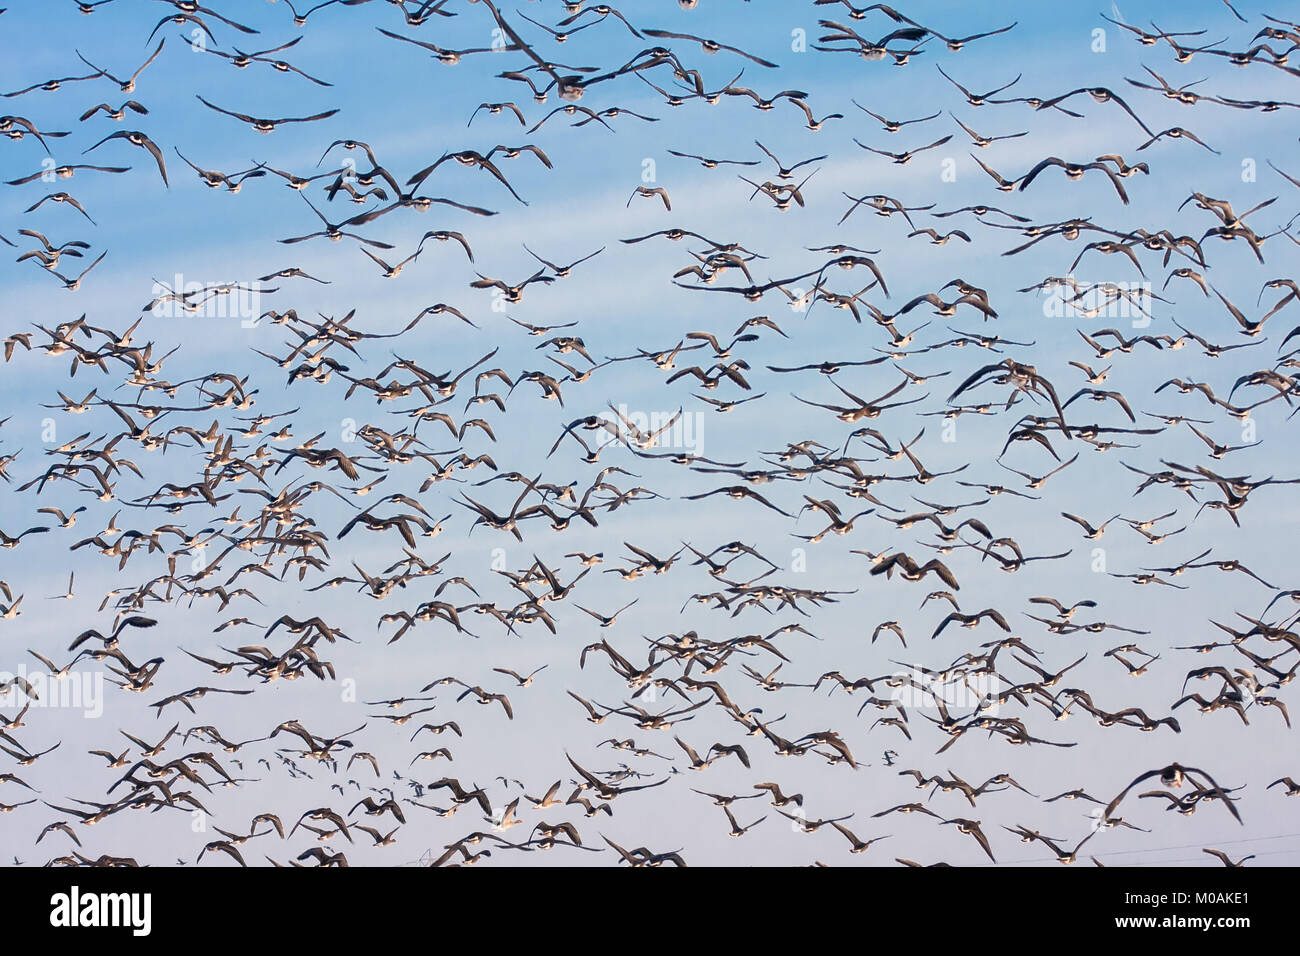 Background of wild geese flying over Flevoland, the Netherlands Stock Photo